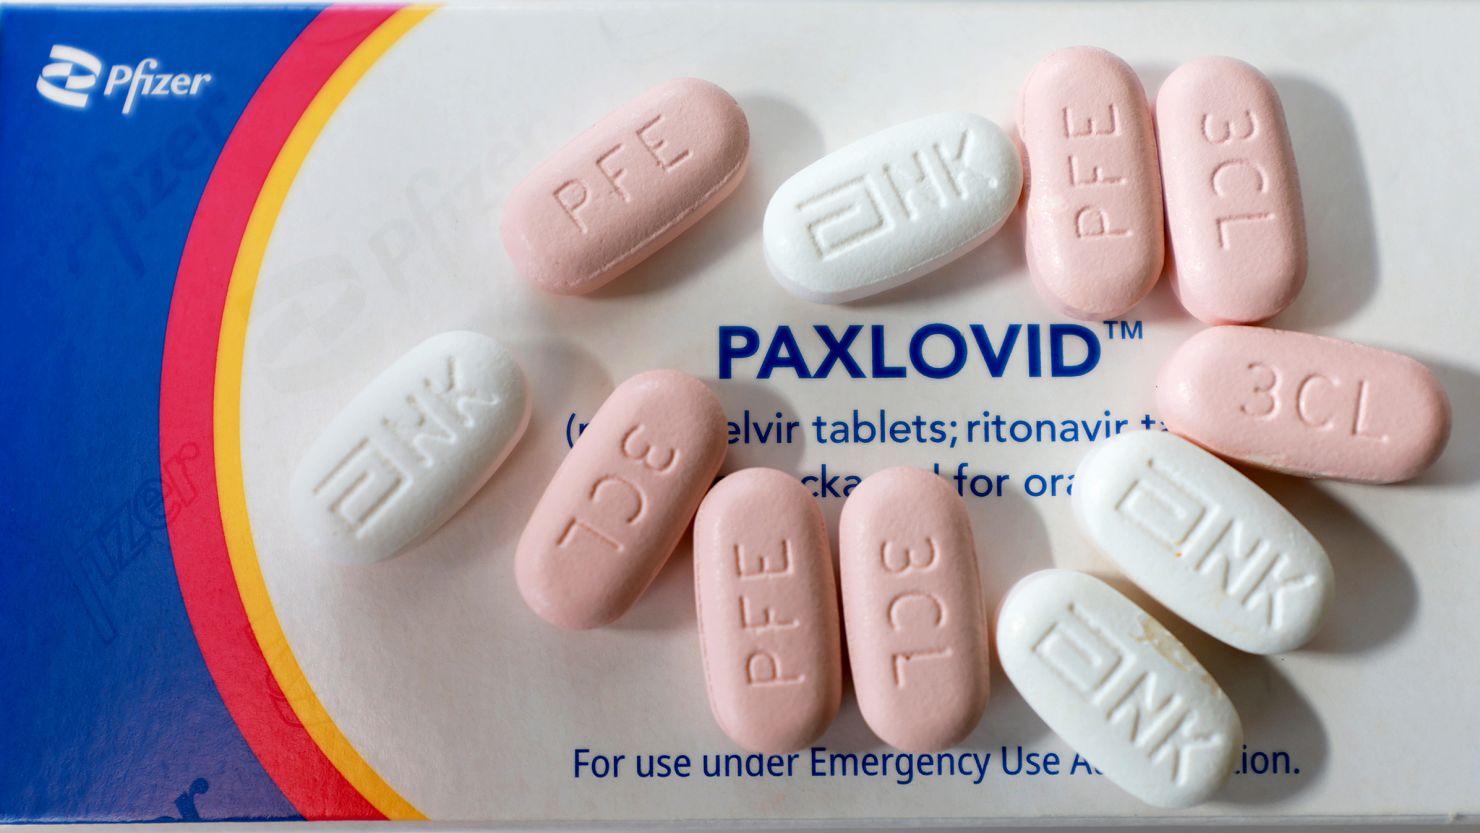 PEMBROKE PINES, FLORIDA - JULY 07: In this photo illustration, Pfizer's Paxlovid is displayed on July 07, 2022 in Pembroke Pines, Florida. The US Food and Drug Administration revised the emergency use authorization for Paxlovid, Pfizer's Covid-19 antiviral treatment, to allow state-licensed pharmacists to prescribe the treatment to people. (Photo by Joe Raedle/Getty Images)